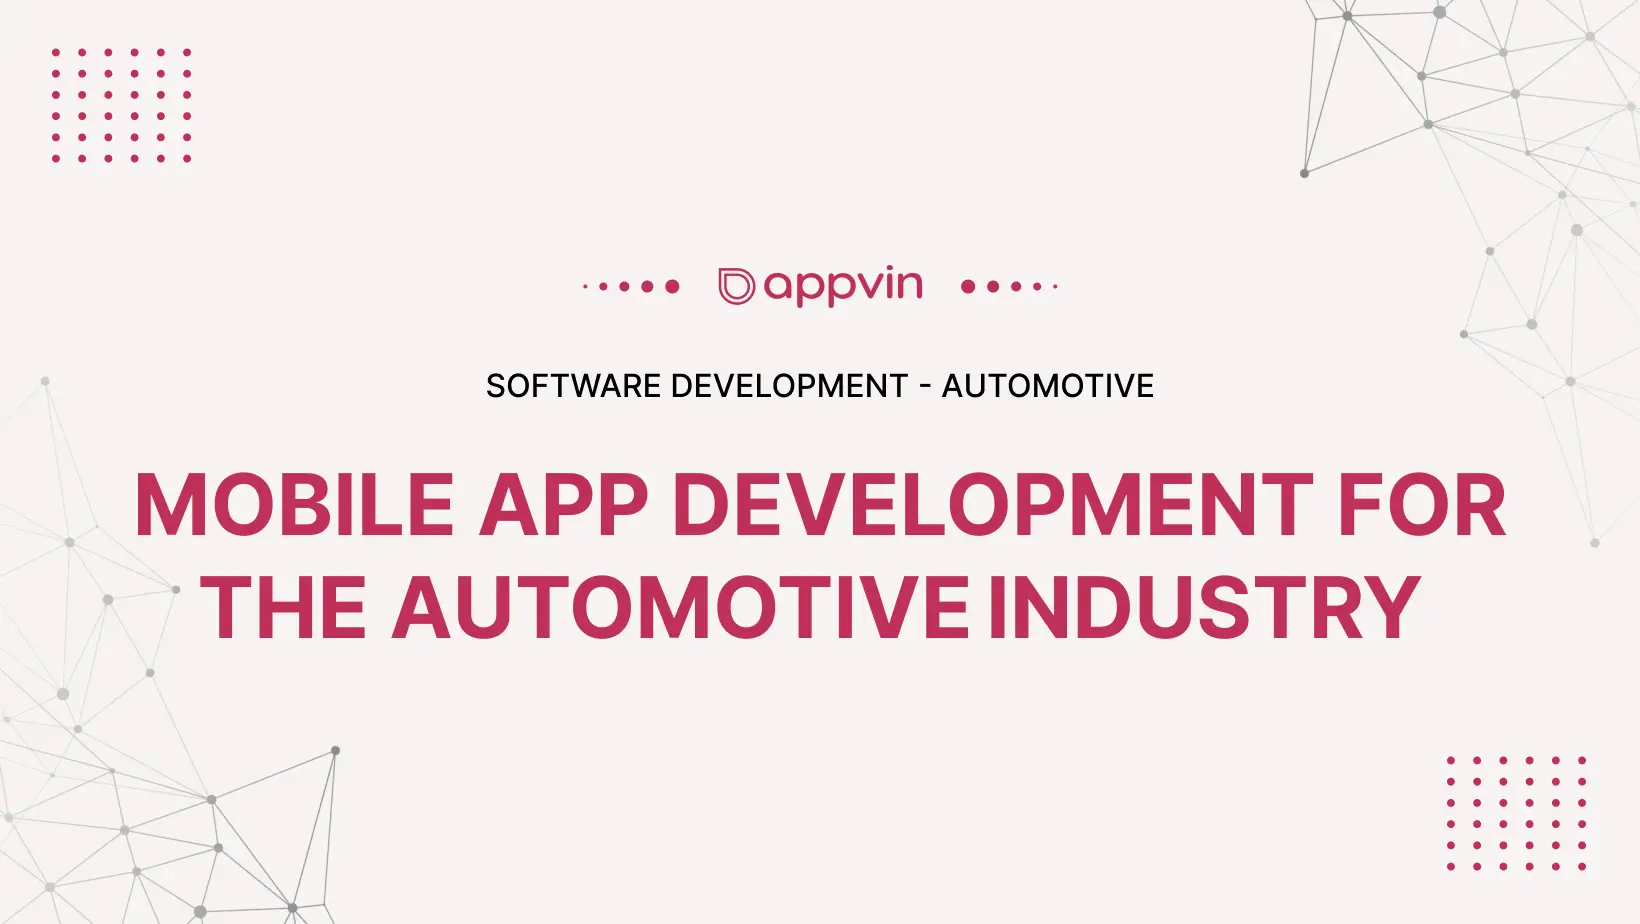 Mobile App Development for the Automotive Industry